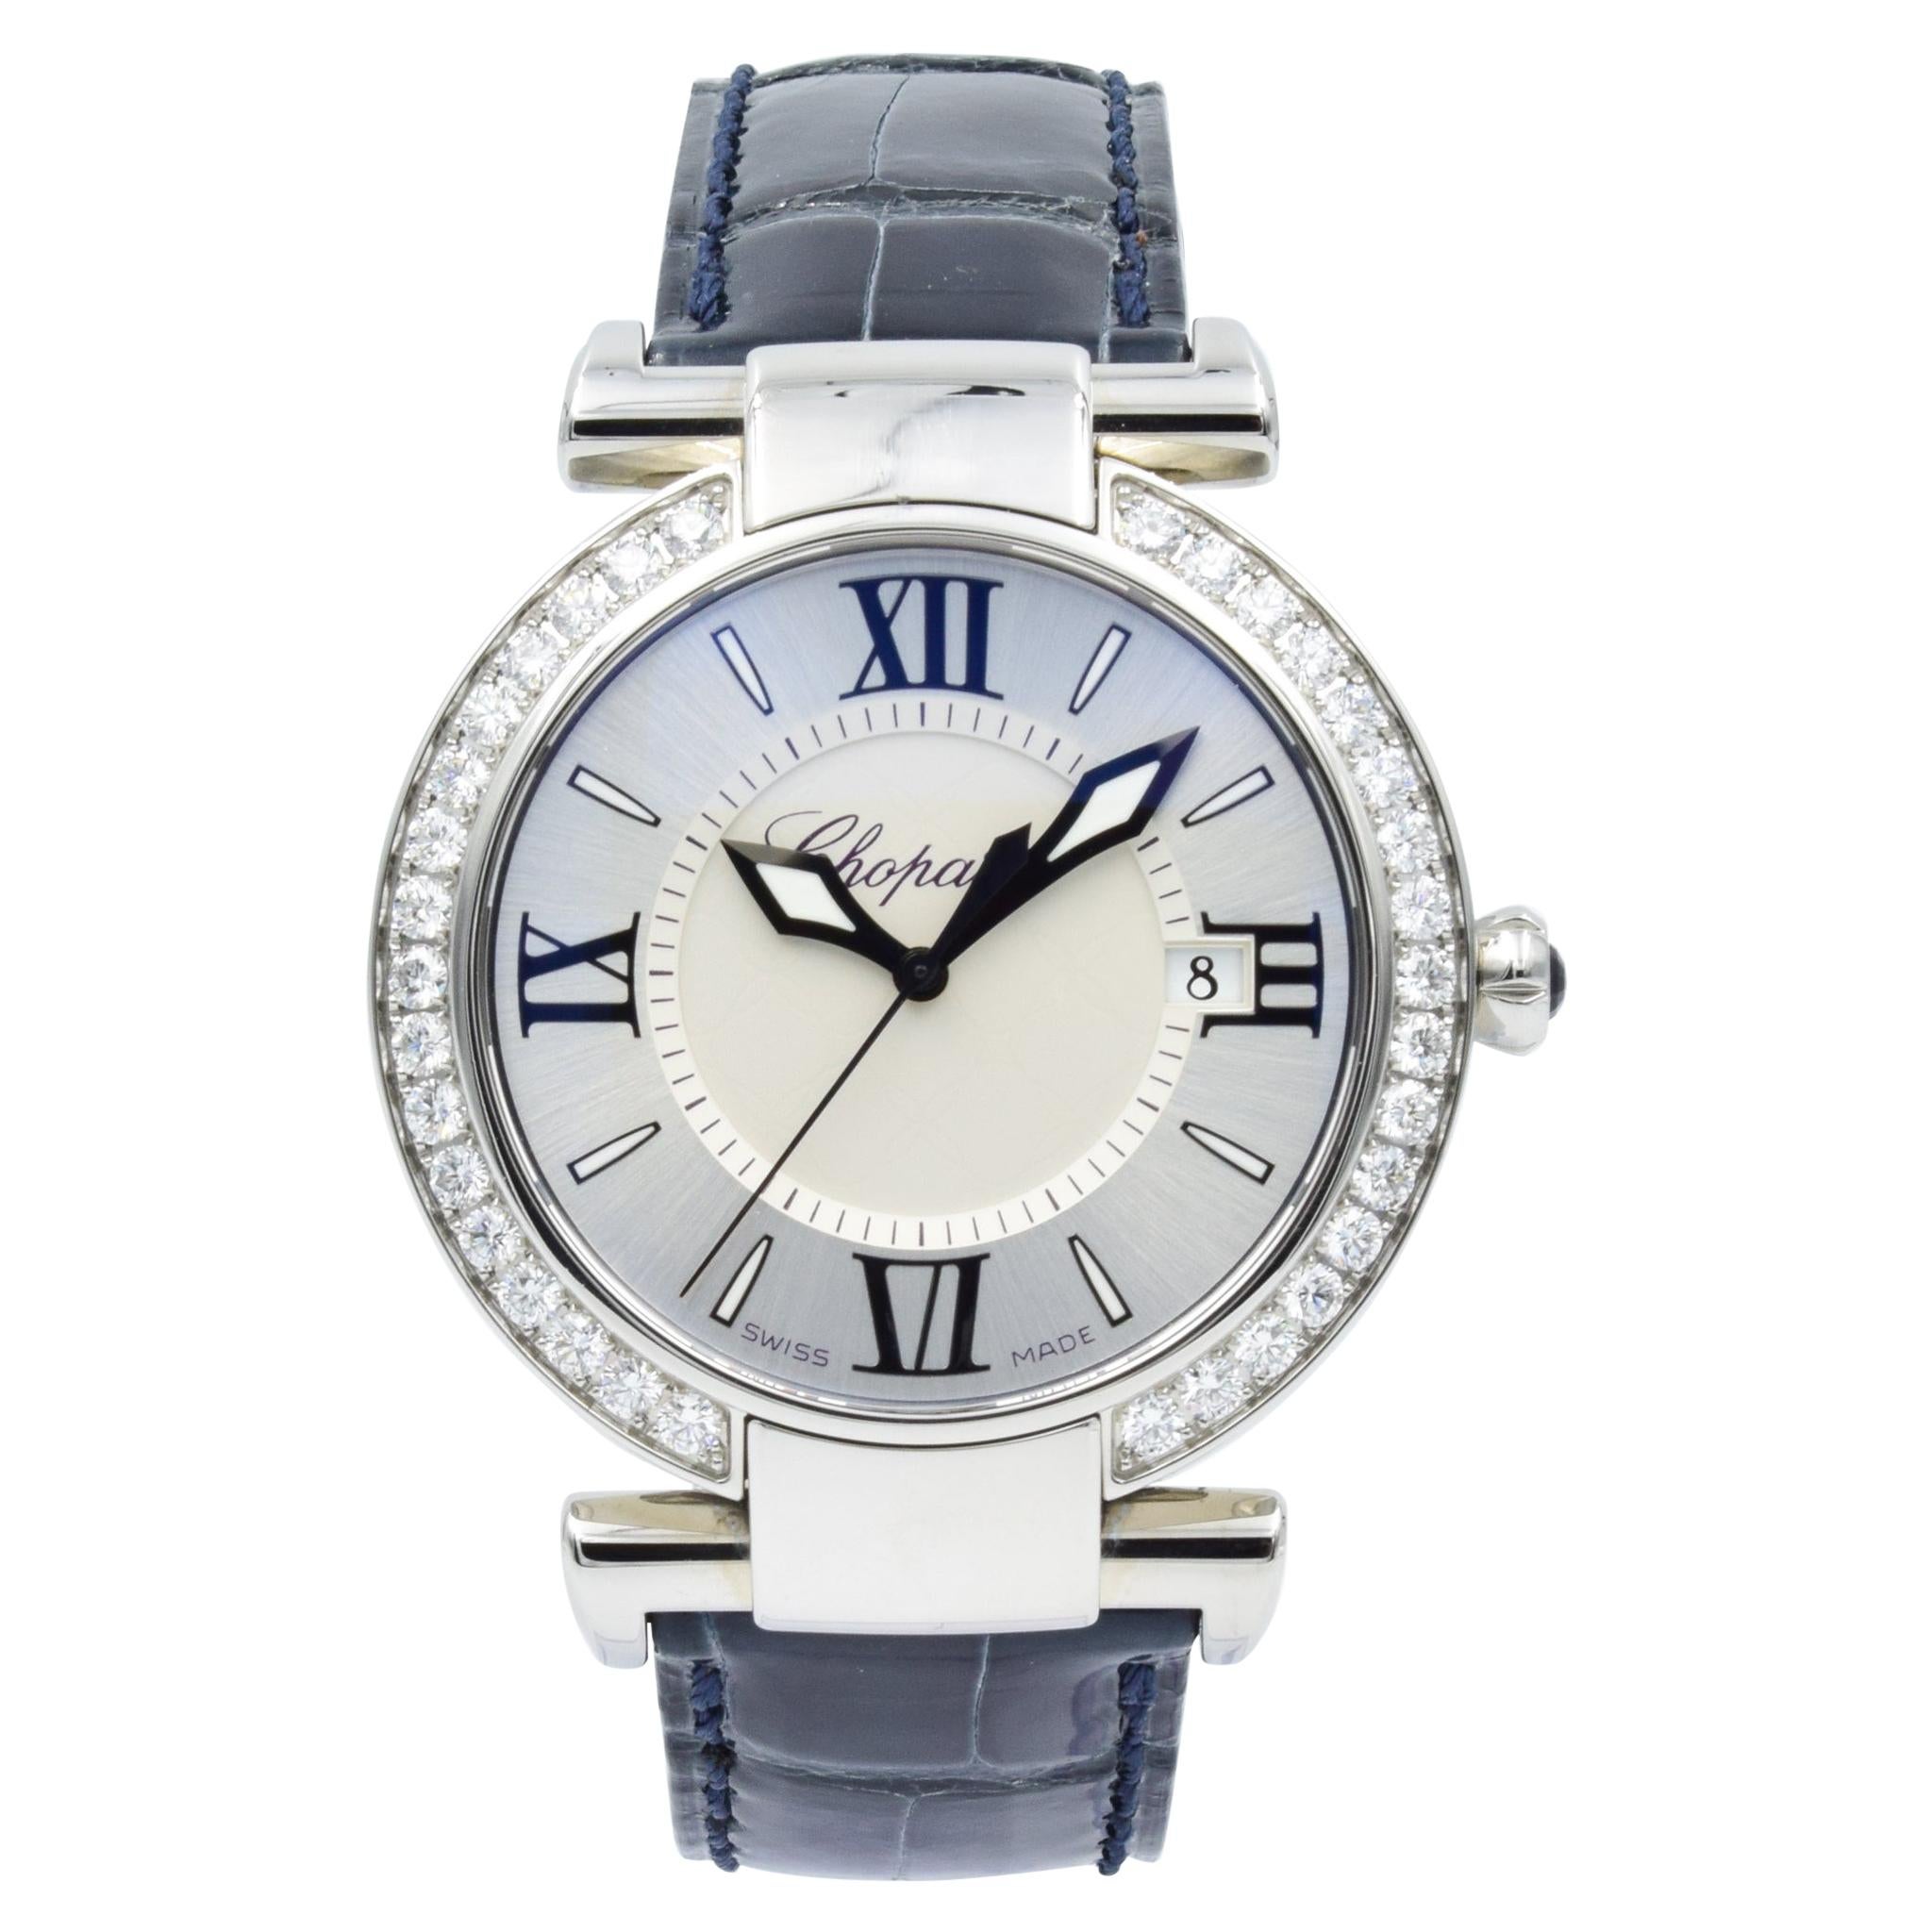 Chopard Imperiale Quartz 388532-3003 Stainless Steel with Diamonds Watch